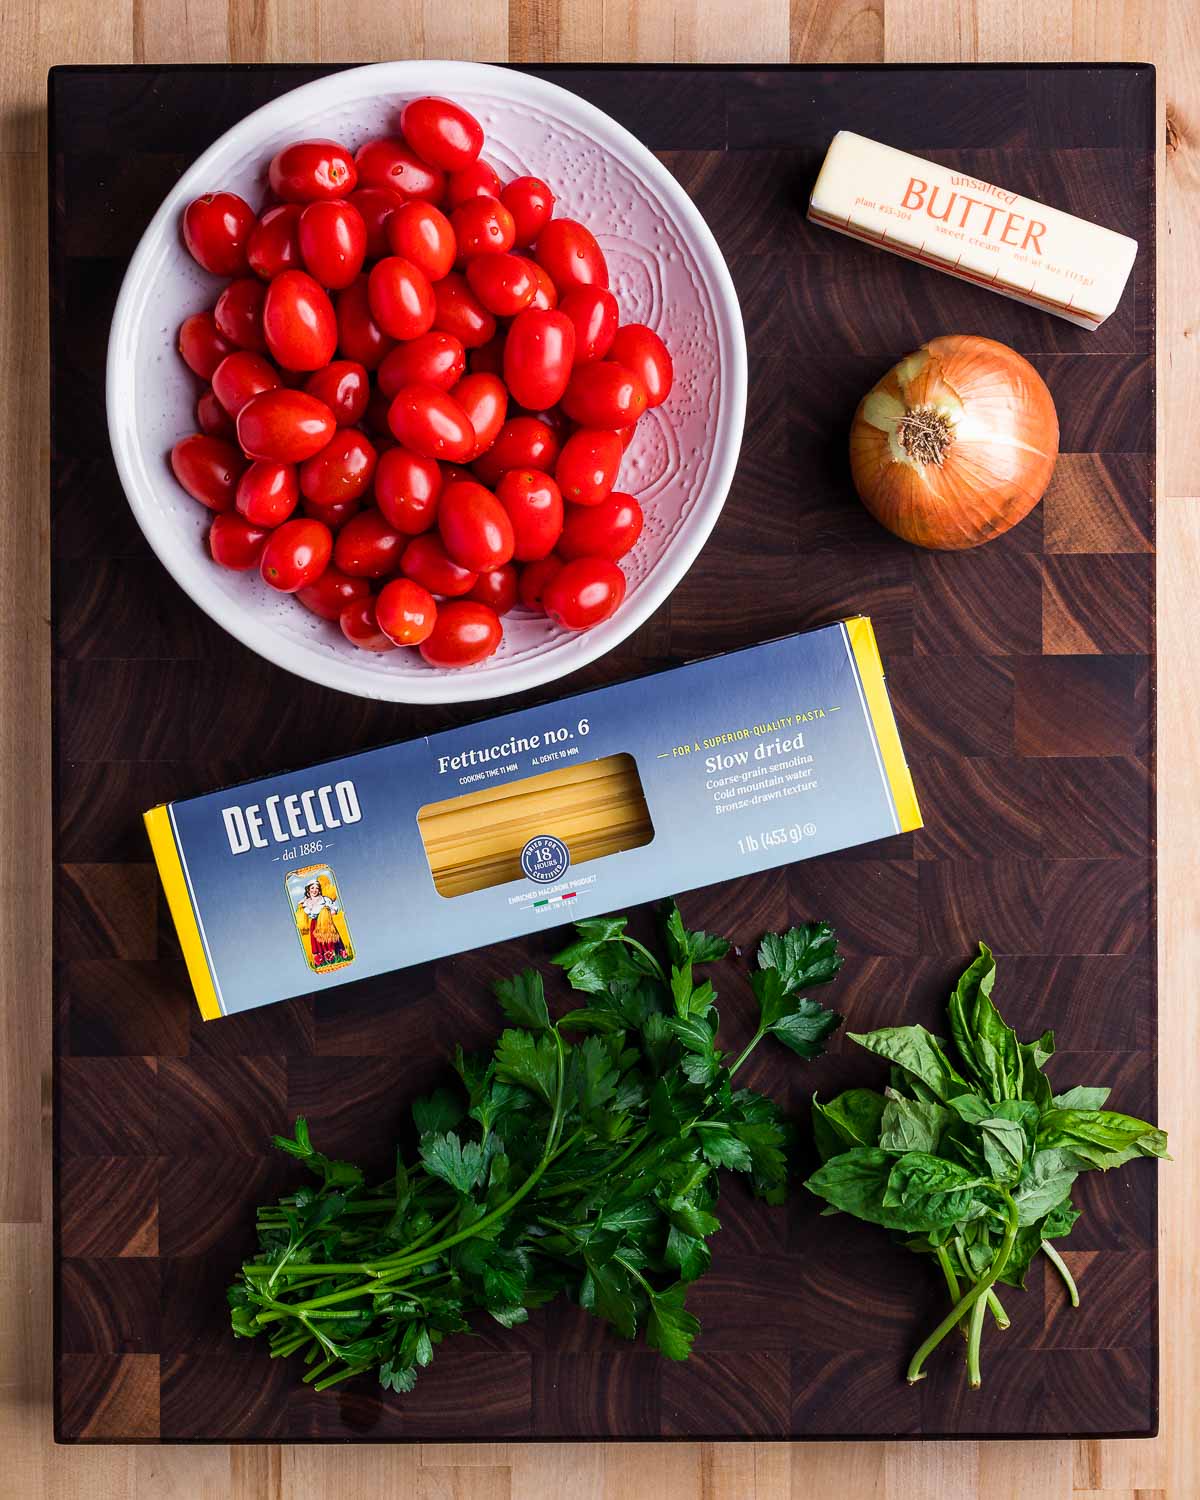 Ingredients shown: cherry tomatoes, butter, onion, fettuccine, parsley, and basil.